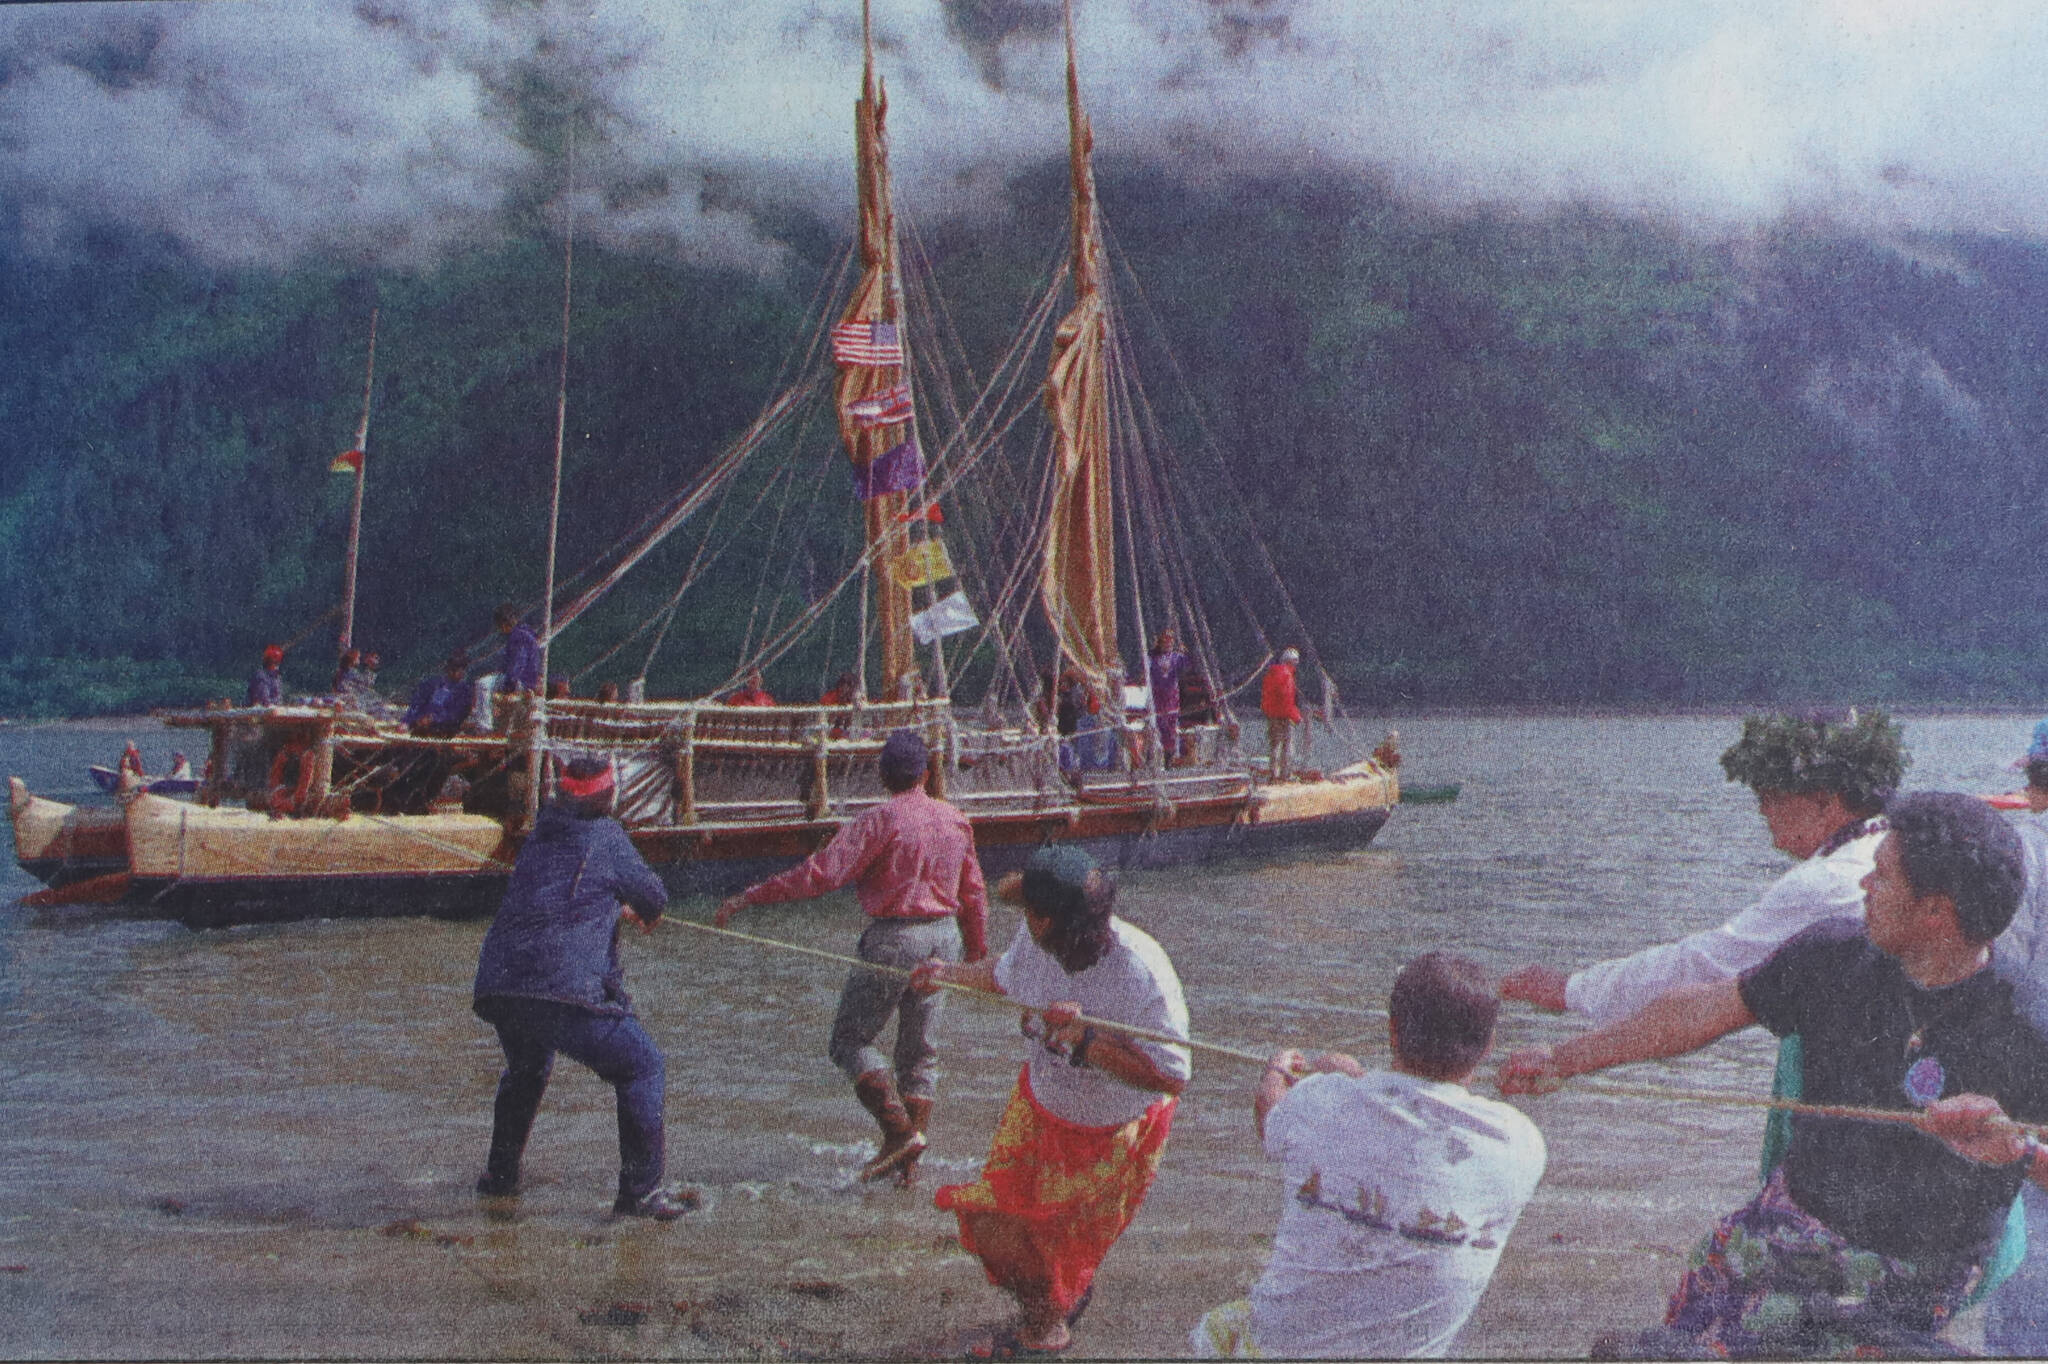 Brian Wallace / Juneau Empire Archives
Members of Juneau’s Hawaiian and Native communities help pull the Hawai’iloa closer to shore at Sandy Beach on July 14, 1995.